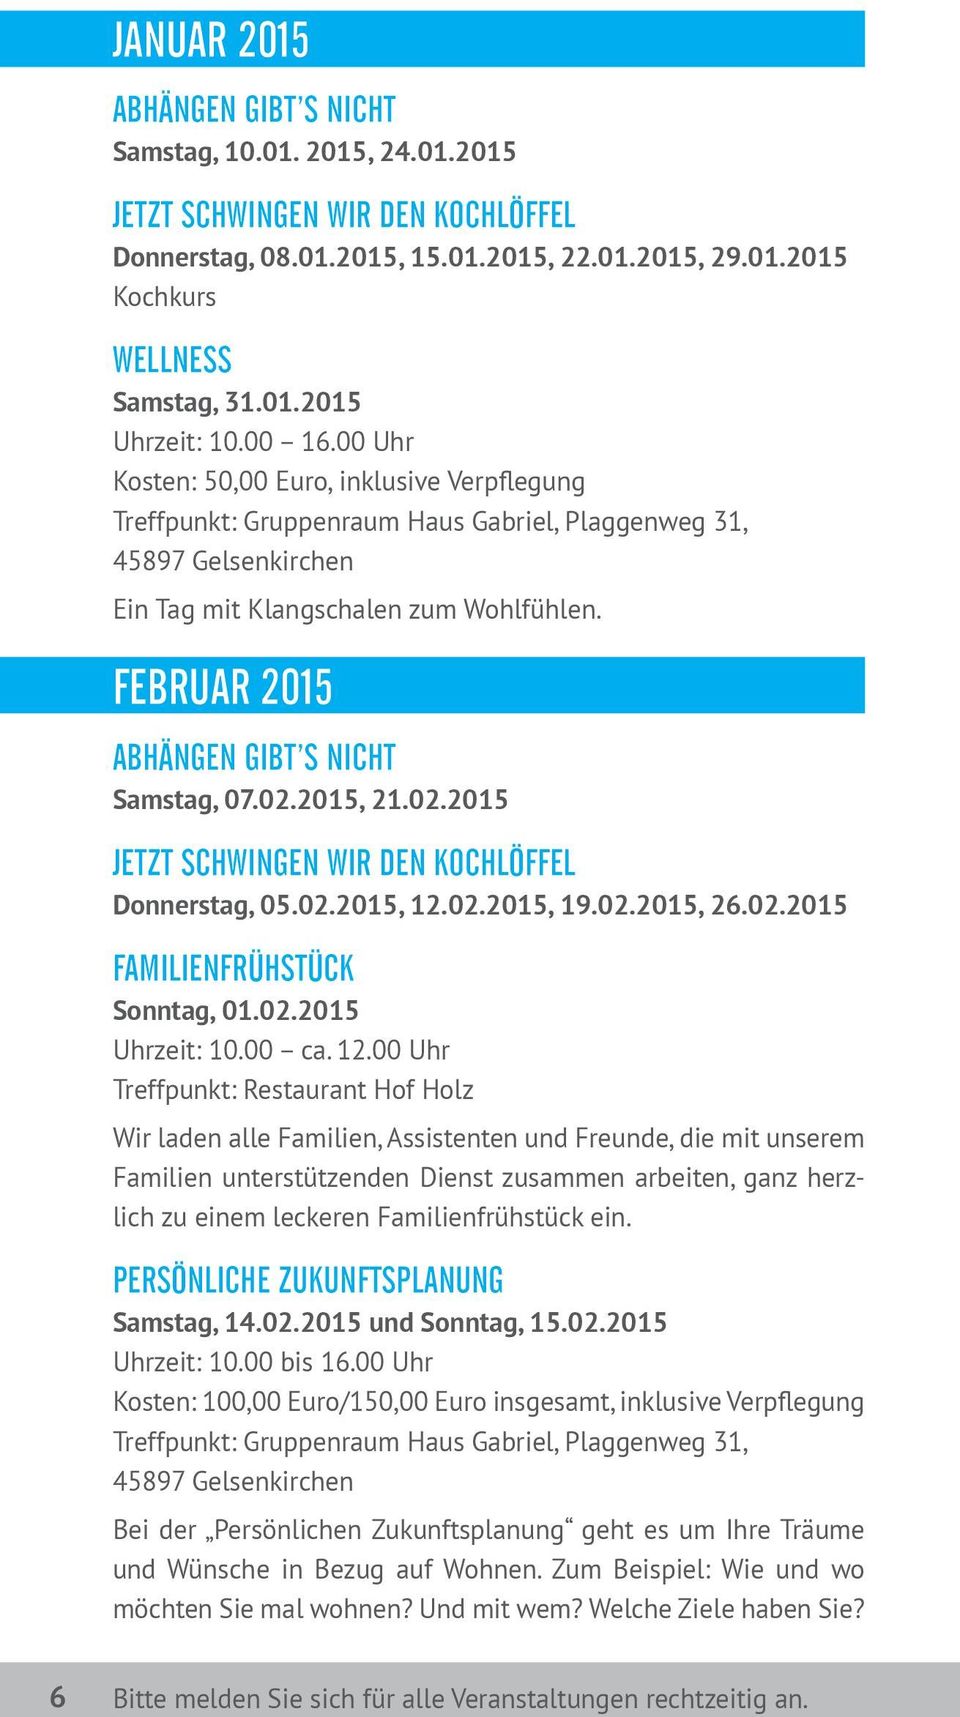 02.2015 Donnerstag, 05.02.2015, 12.